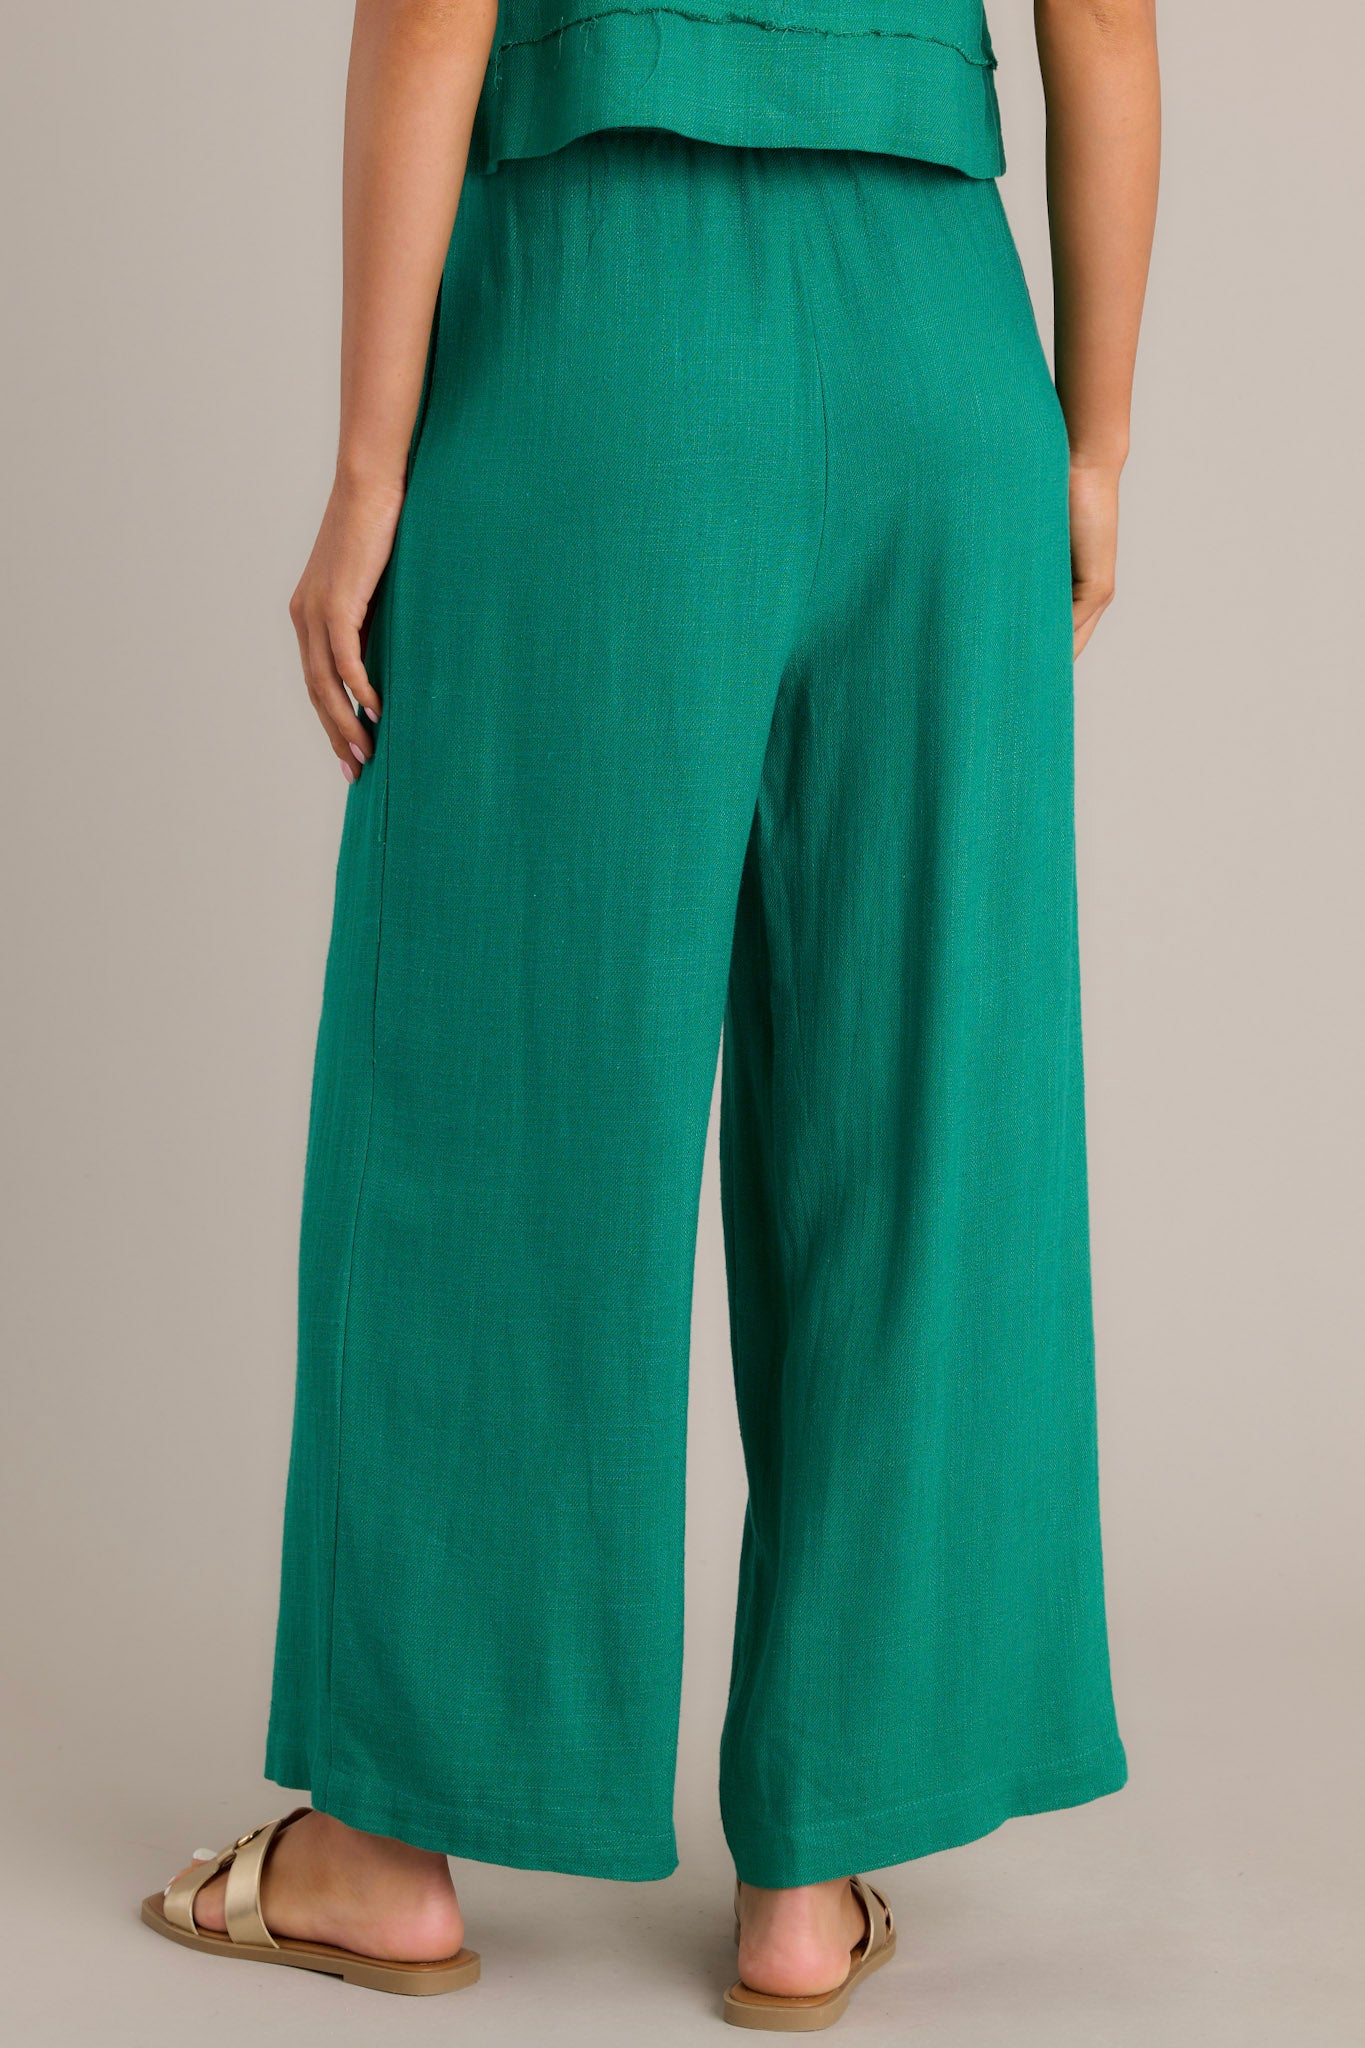 Back view of green pants showcasing the elastic insert in the back, lightweight fabric, and wide leg cut.